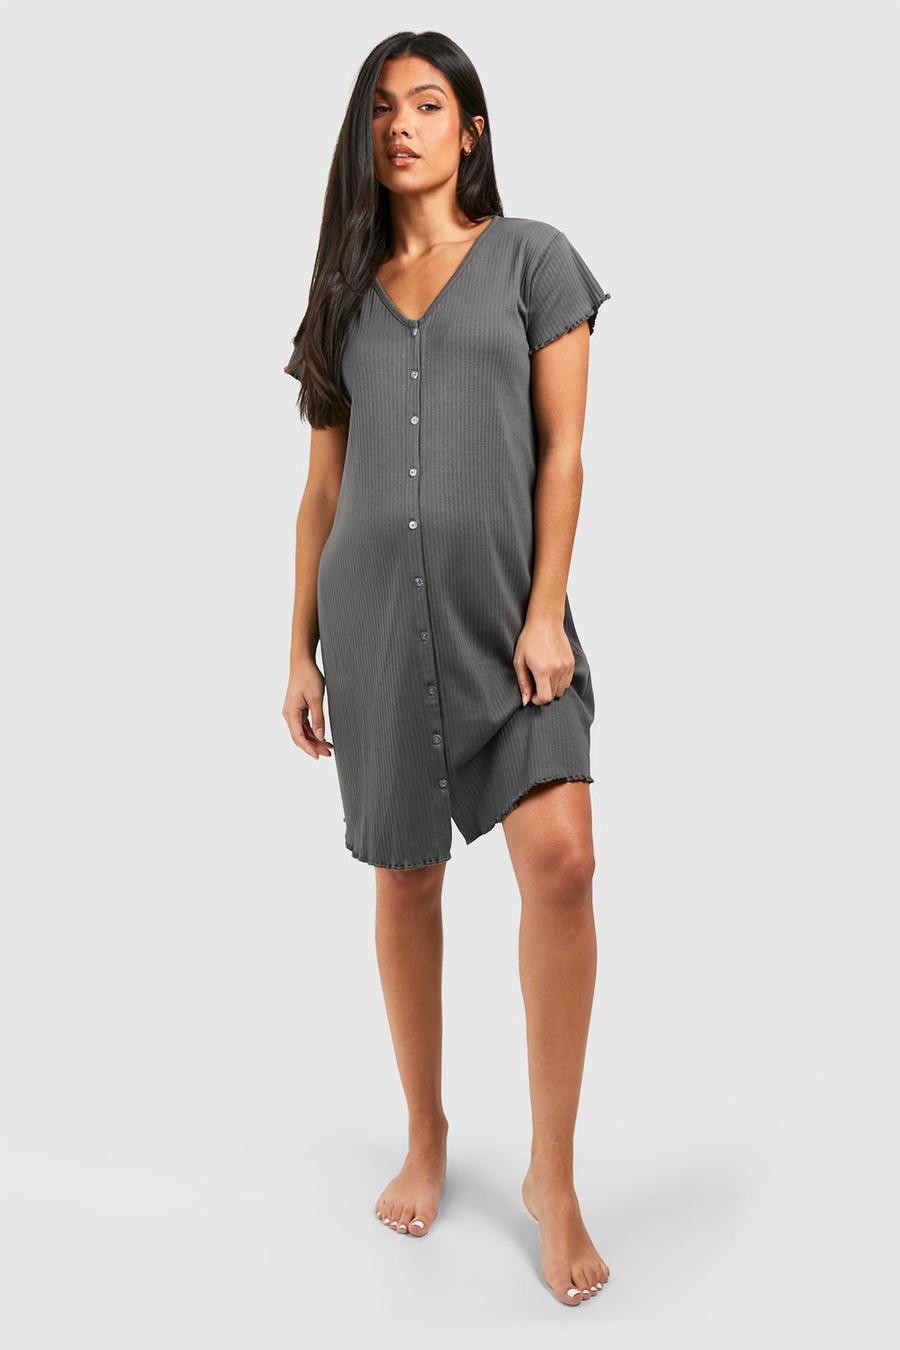 Charcoal trimmed button-down shirt